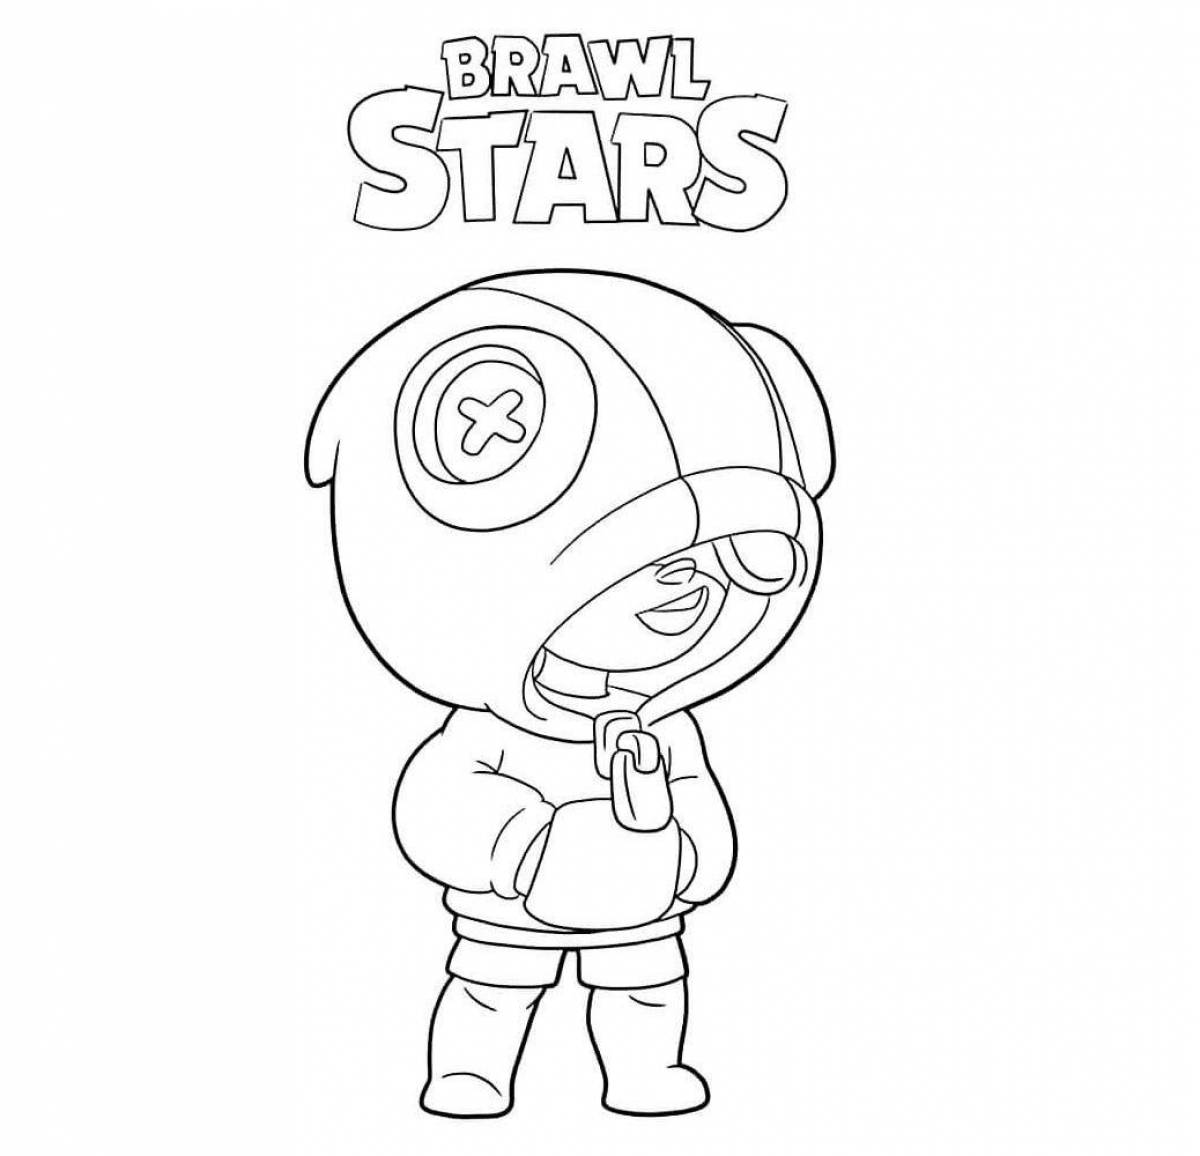 Sparkling brown stars coloring page